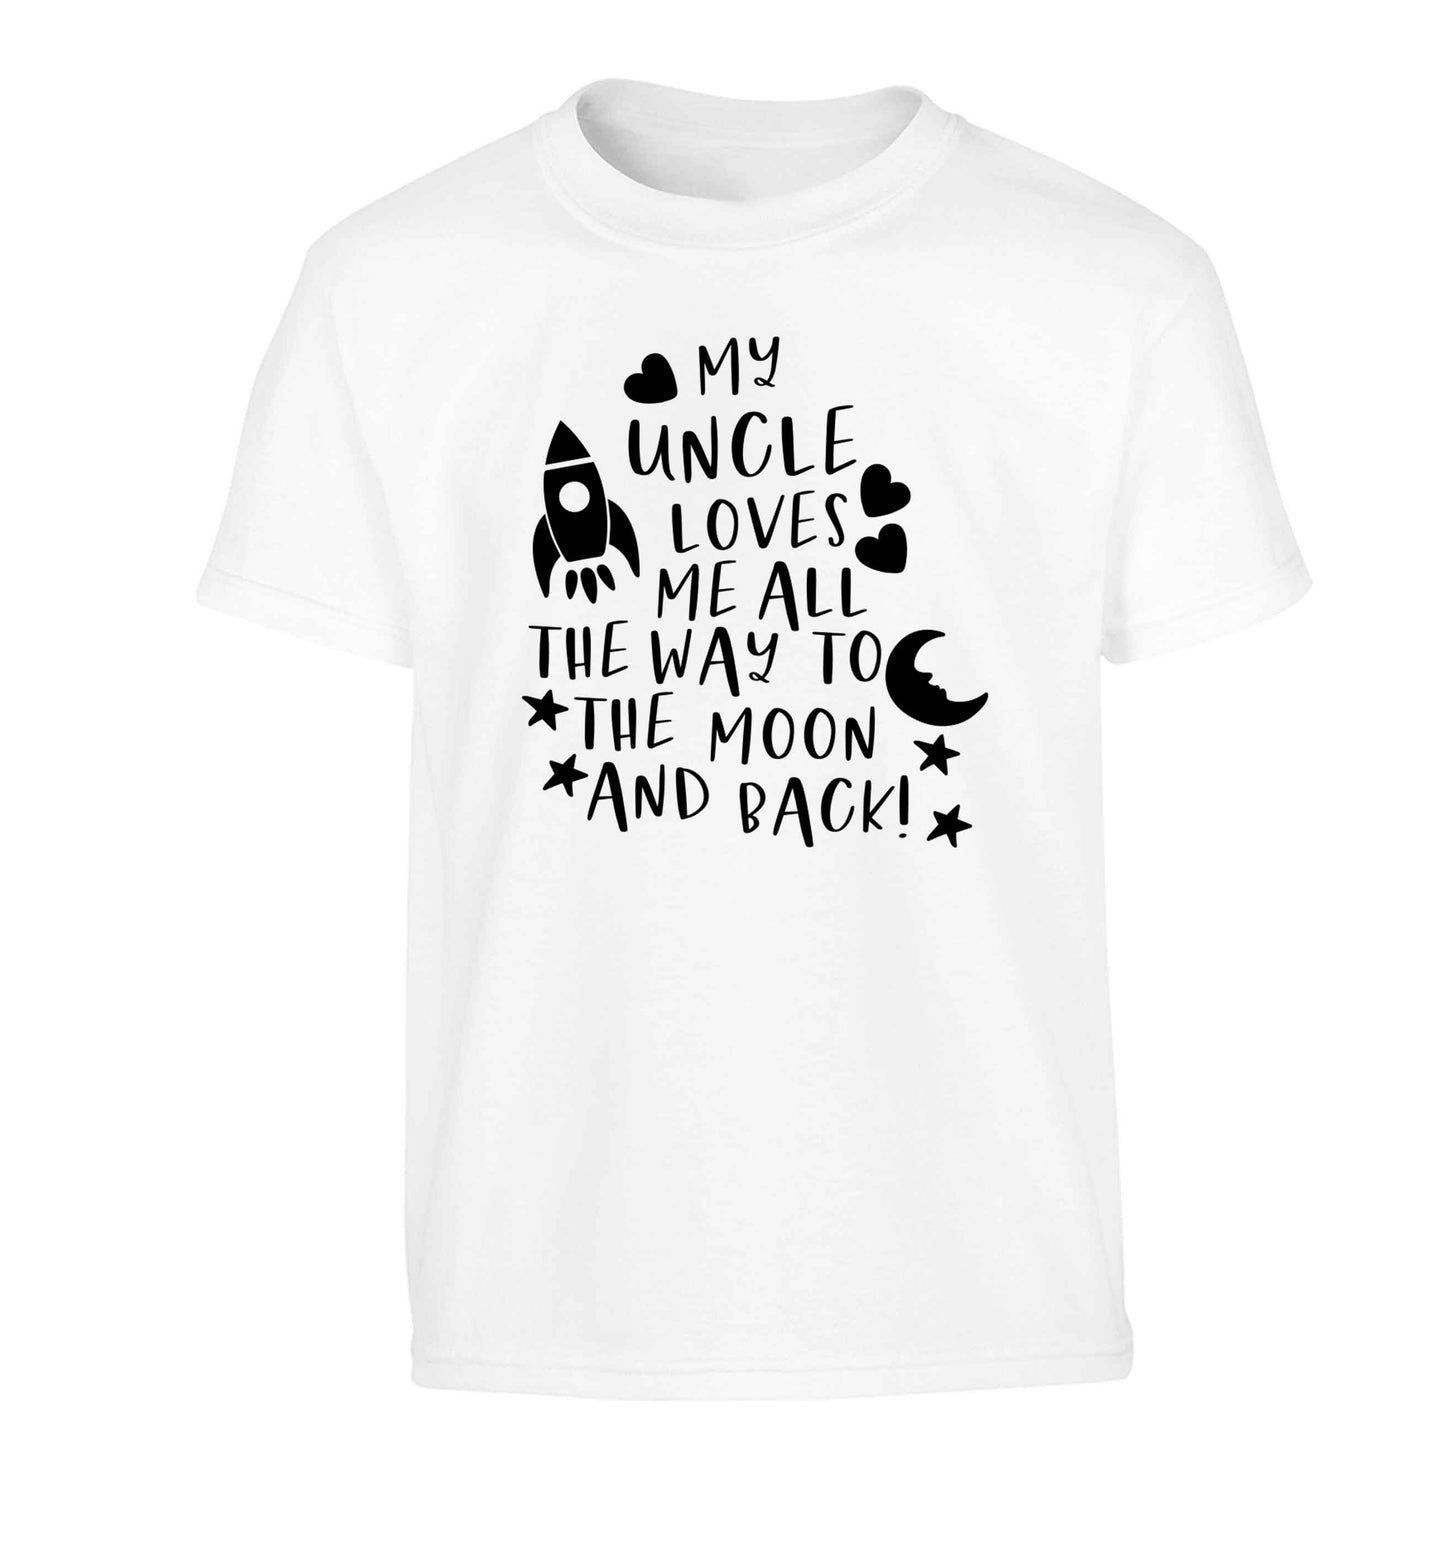 My uncle loves me all the way to the moon and back Children's white Tshirt 12-13 Years